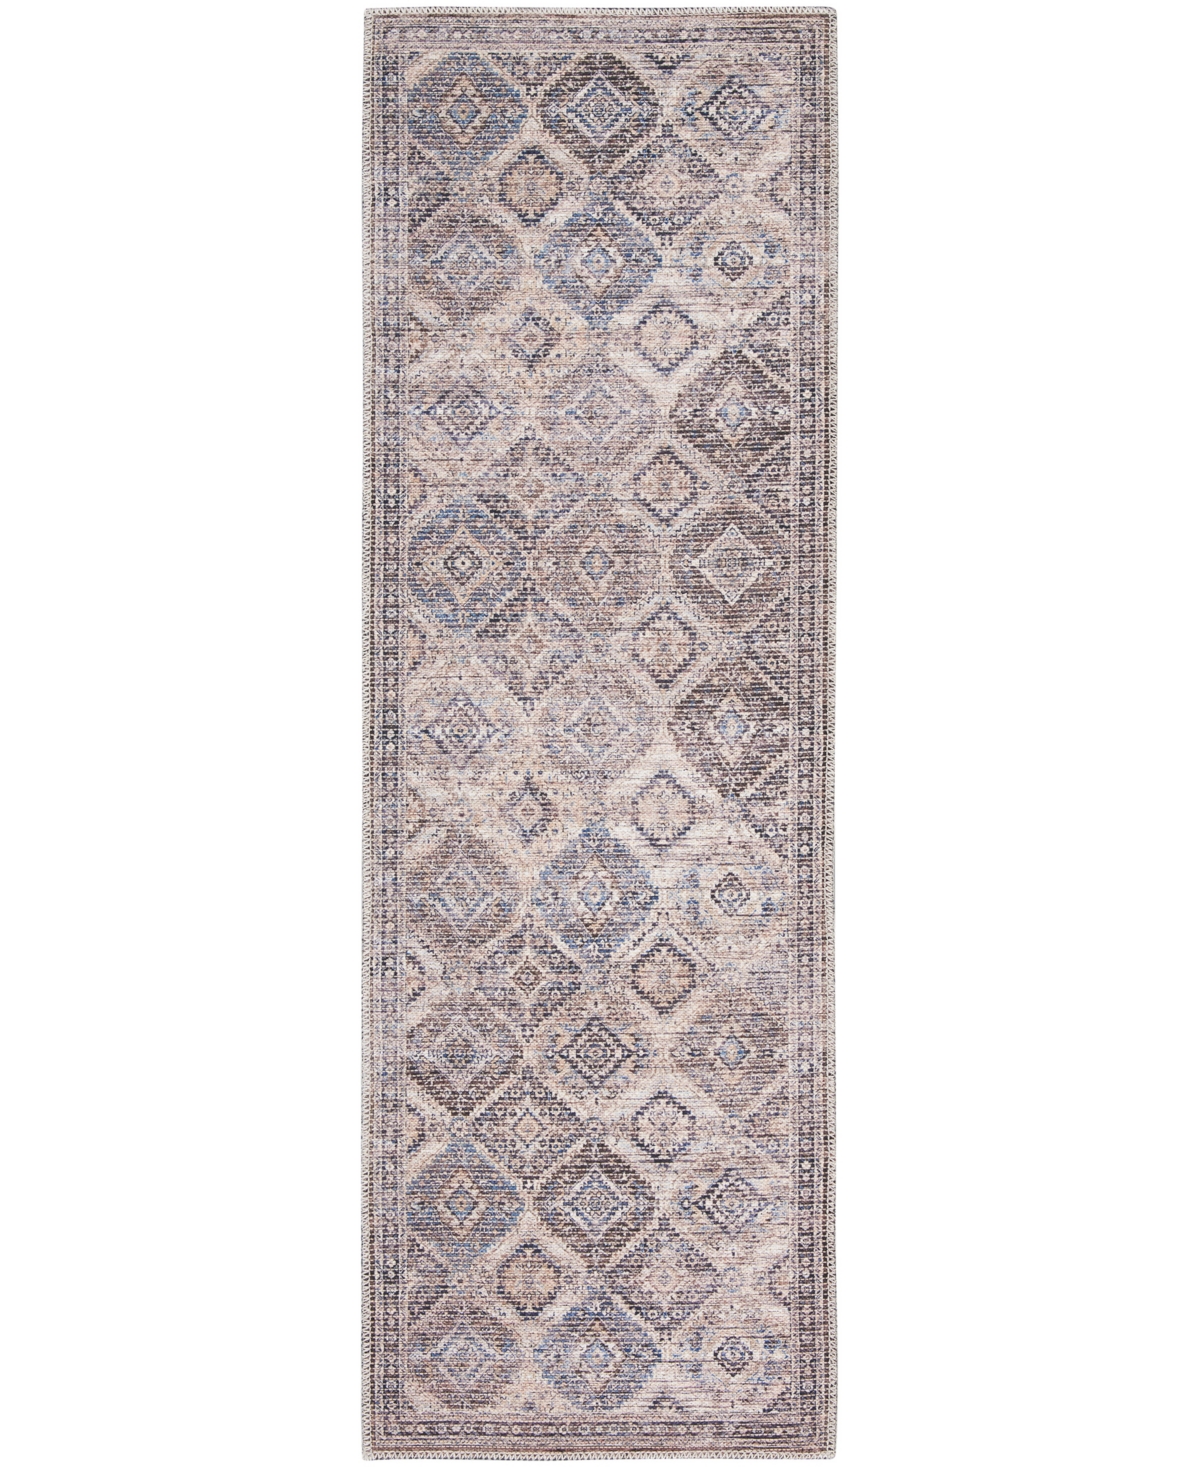 Nicole Curtis Series 1 Sr103 Machine-washable 2' X 6' Runner Area Rug In Ivory,tan